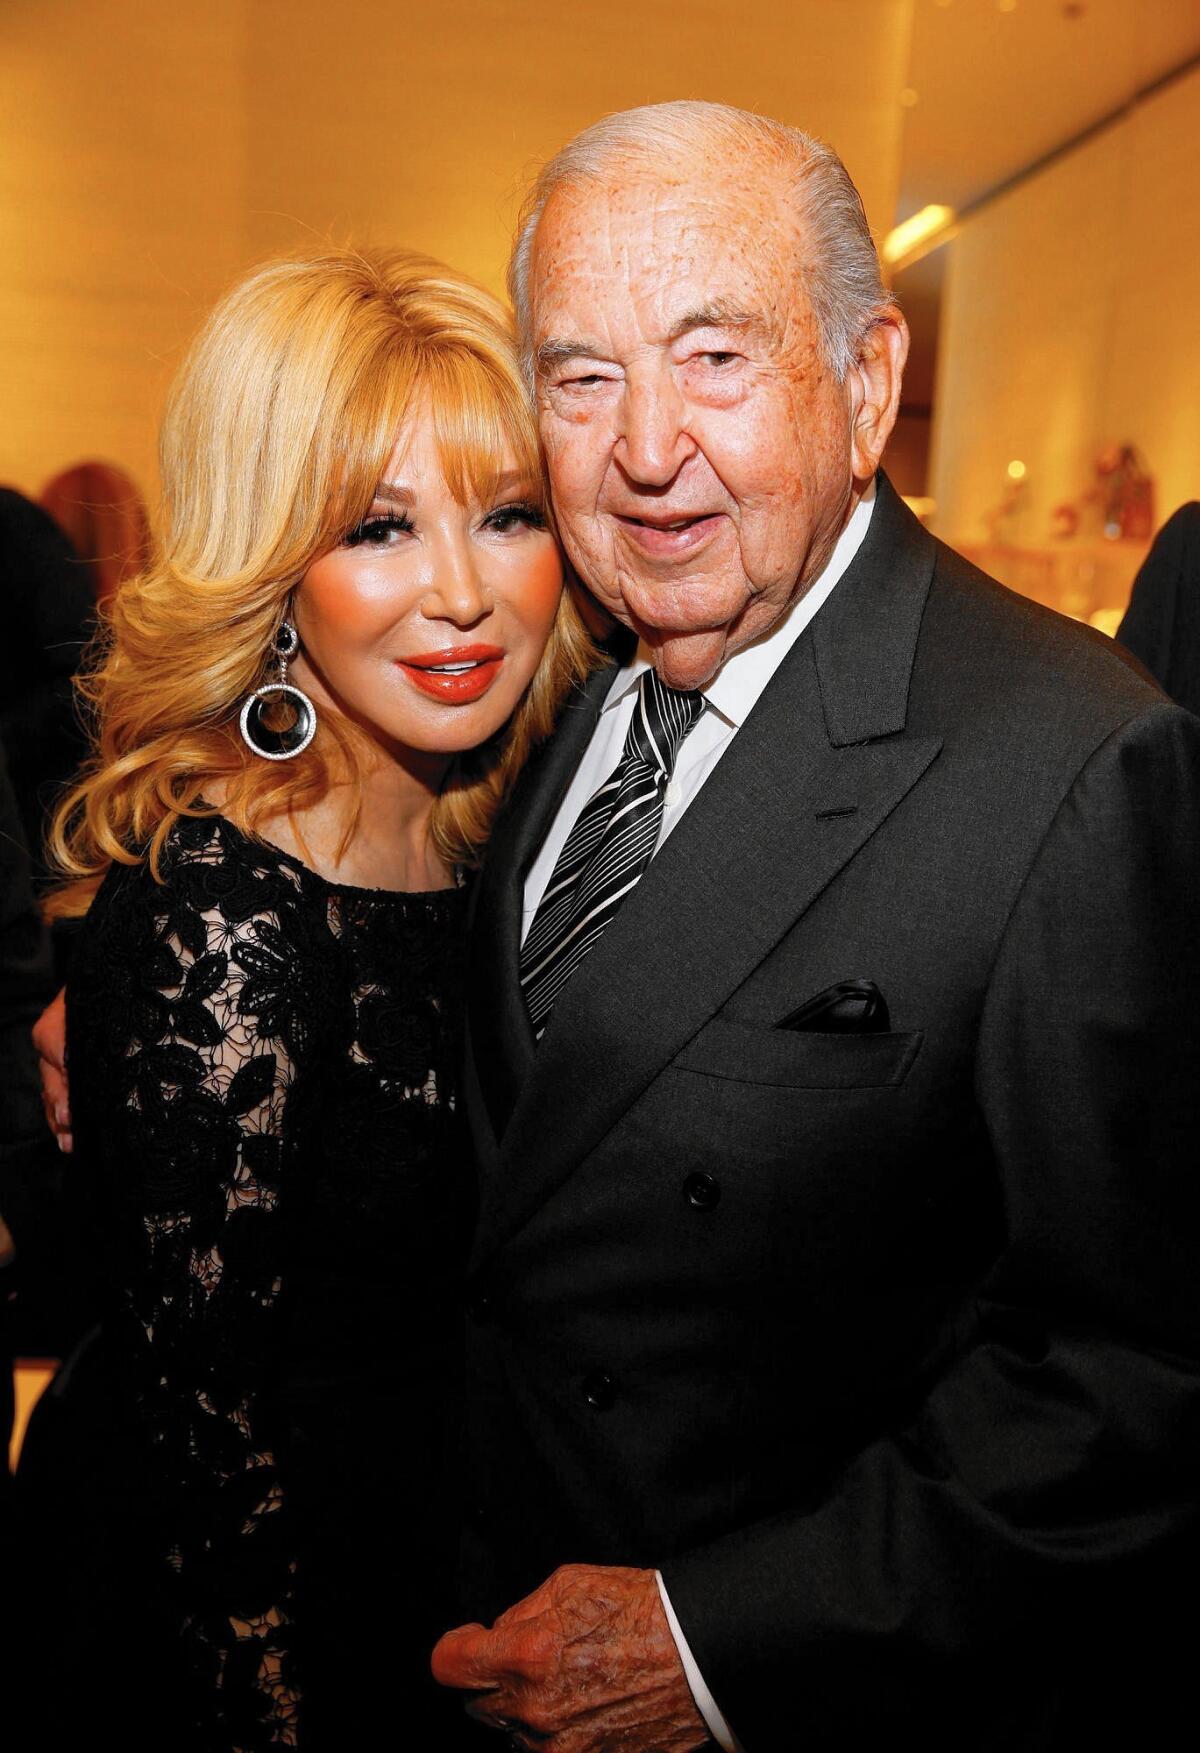 William Lyon, right, shown posing with Elizabeth Segerstrom in 2015, died on Friday.